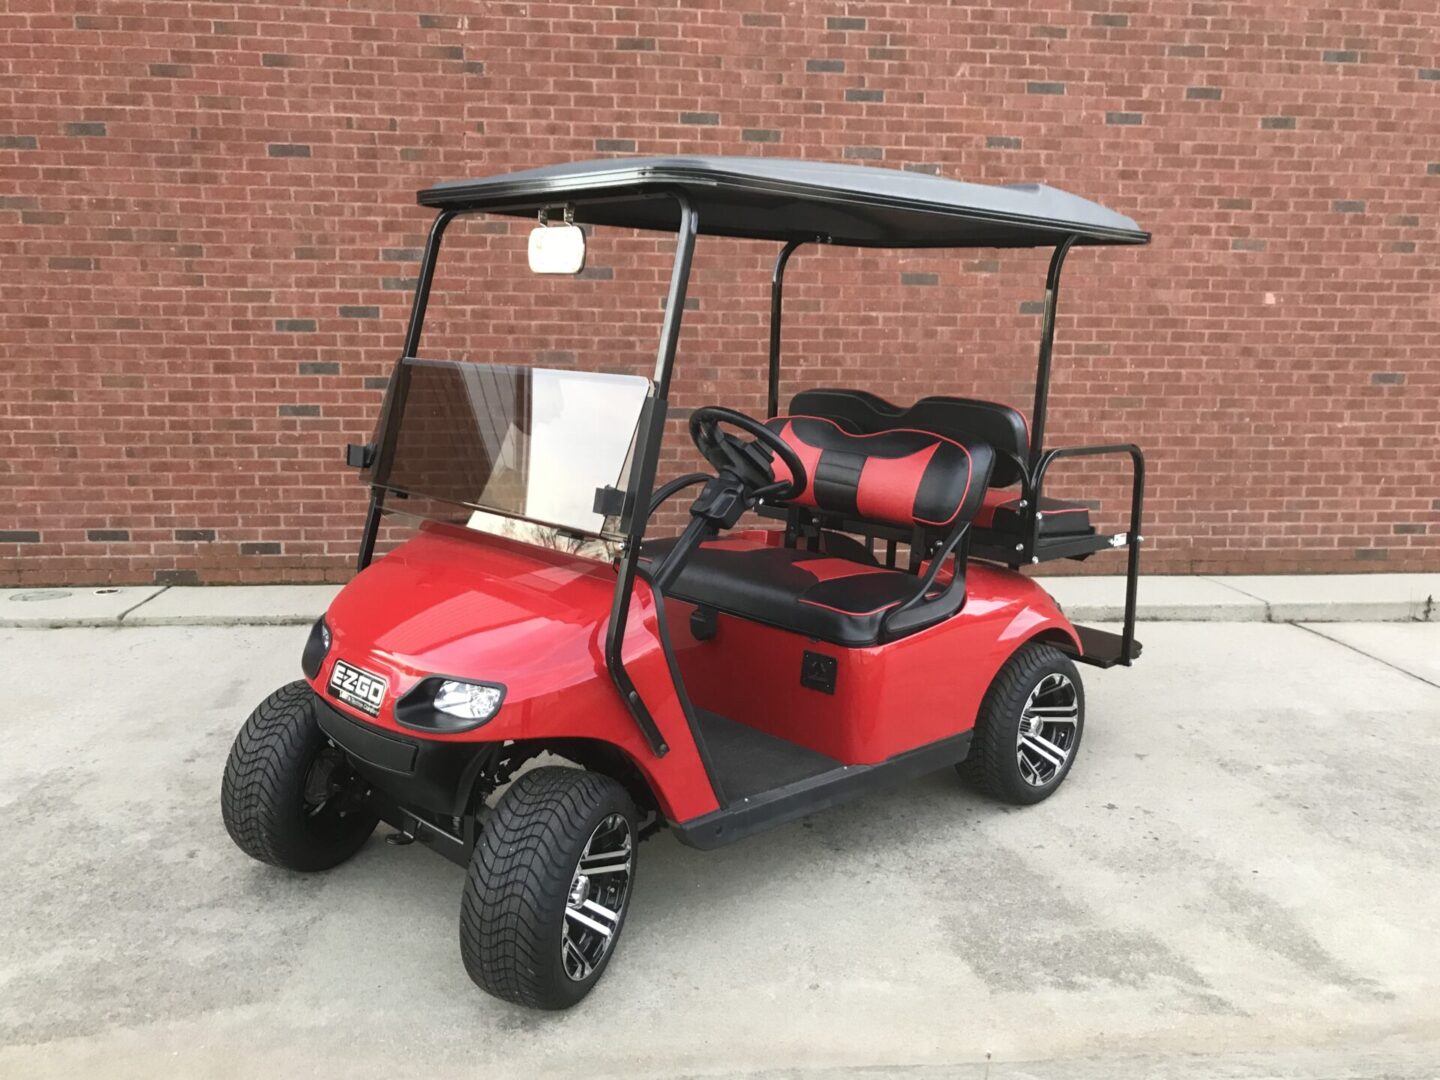 A red golf cart parked in front of a brick wall.